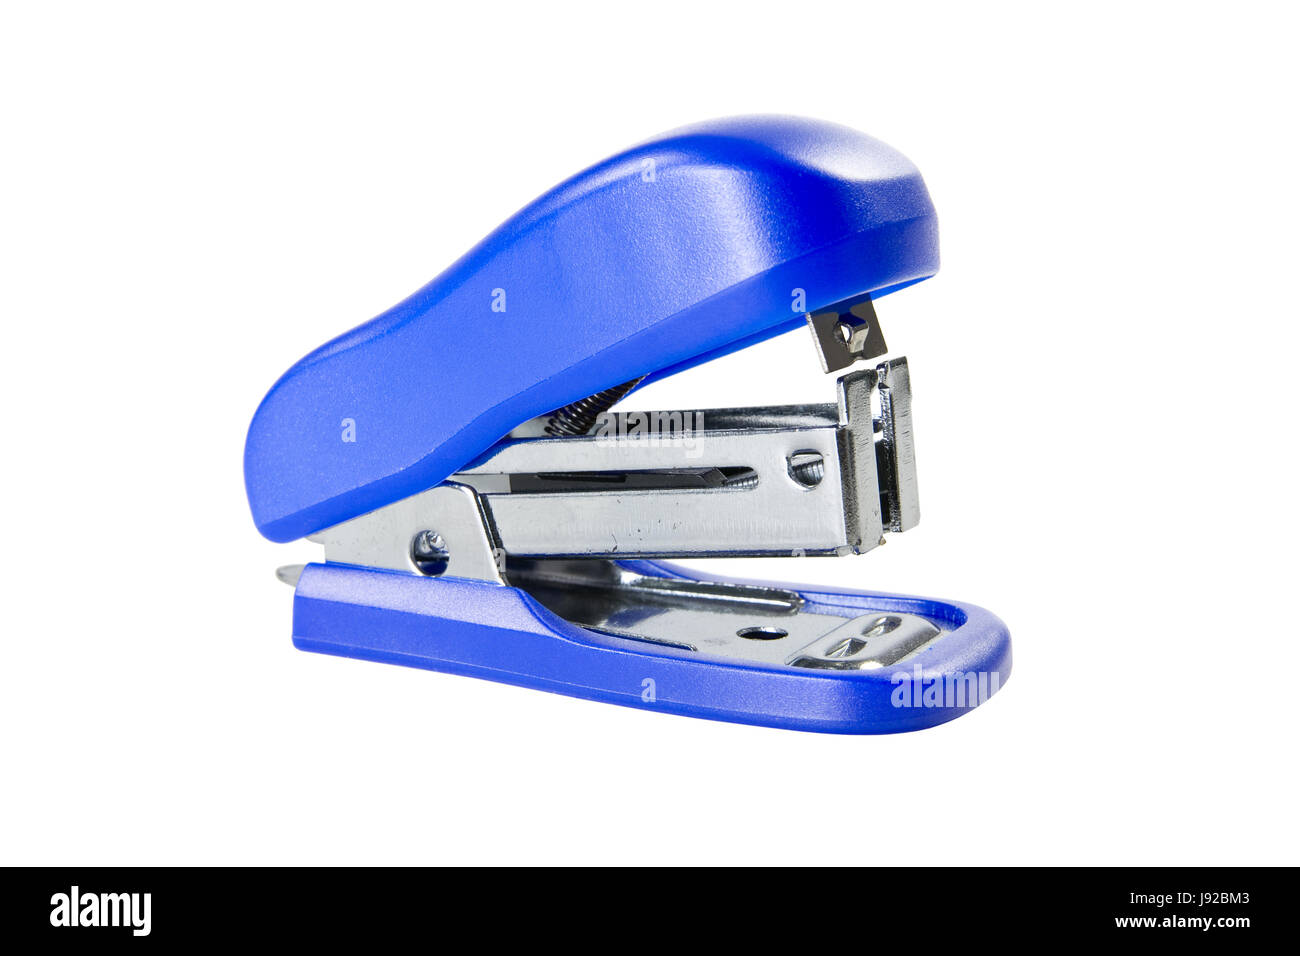 blue, tool, object, accessories, accessory, equipment, stapler, work, blue, Stock Photo